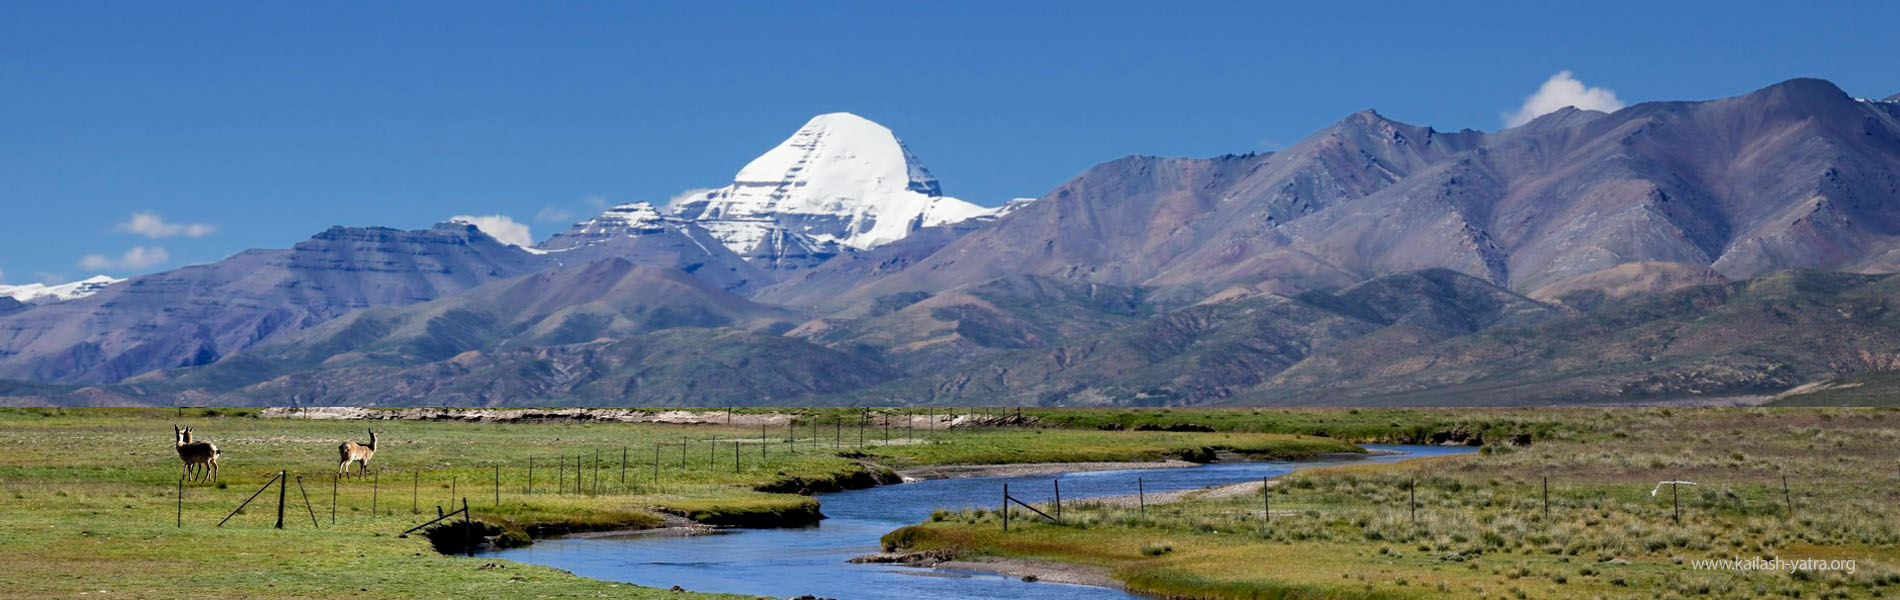 Mount Kailash South Face with River